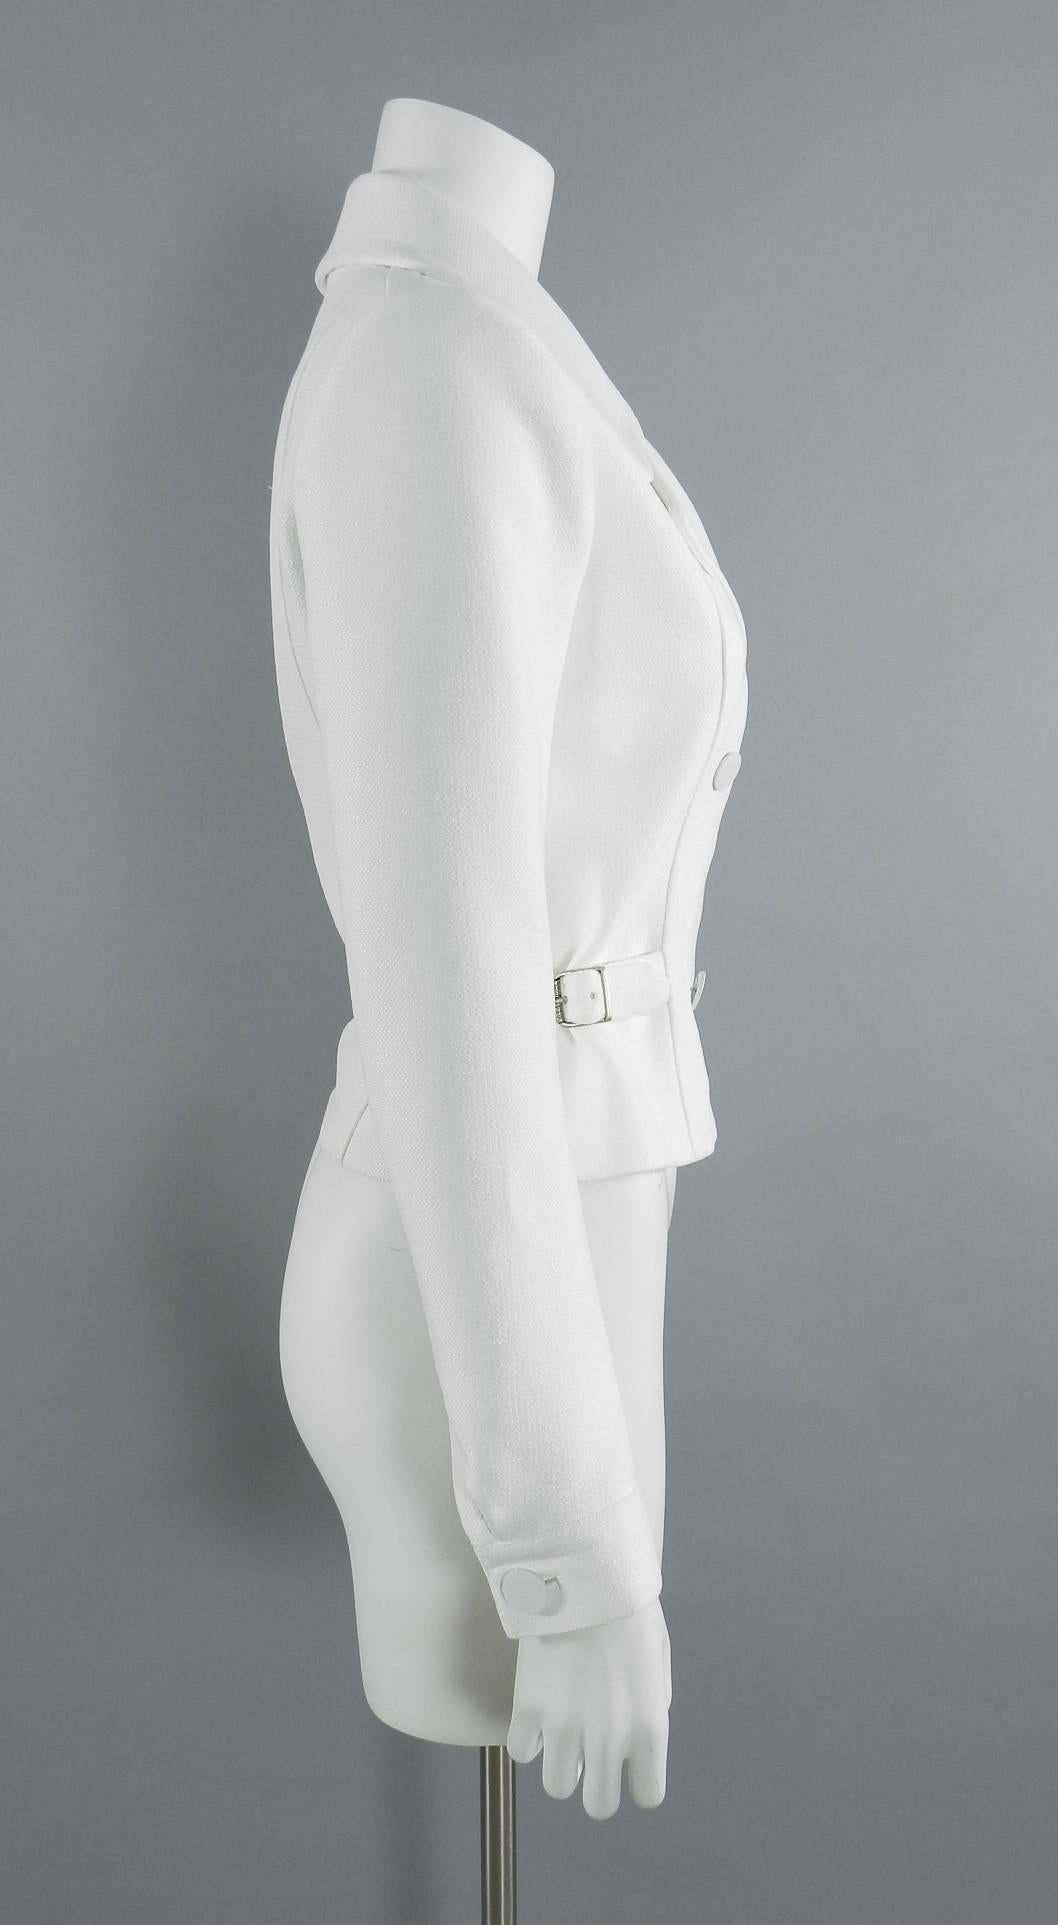 Alaia white jacket with side buckles and double row of white buttons. Brand new unworn with retail store price tag of $5640 attached.  Tagged size FR 40 but Alaia runs small and is recommended for USA 6.  To fit 34" bust, garment waist measures